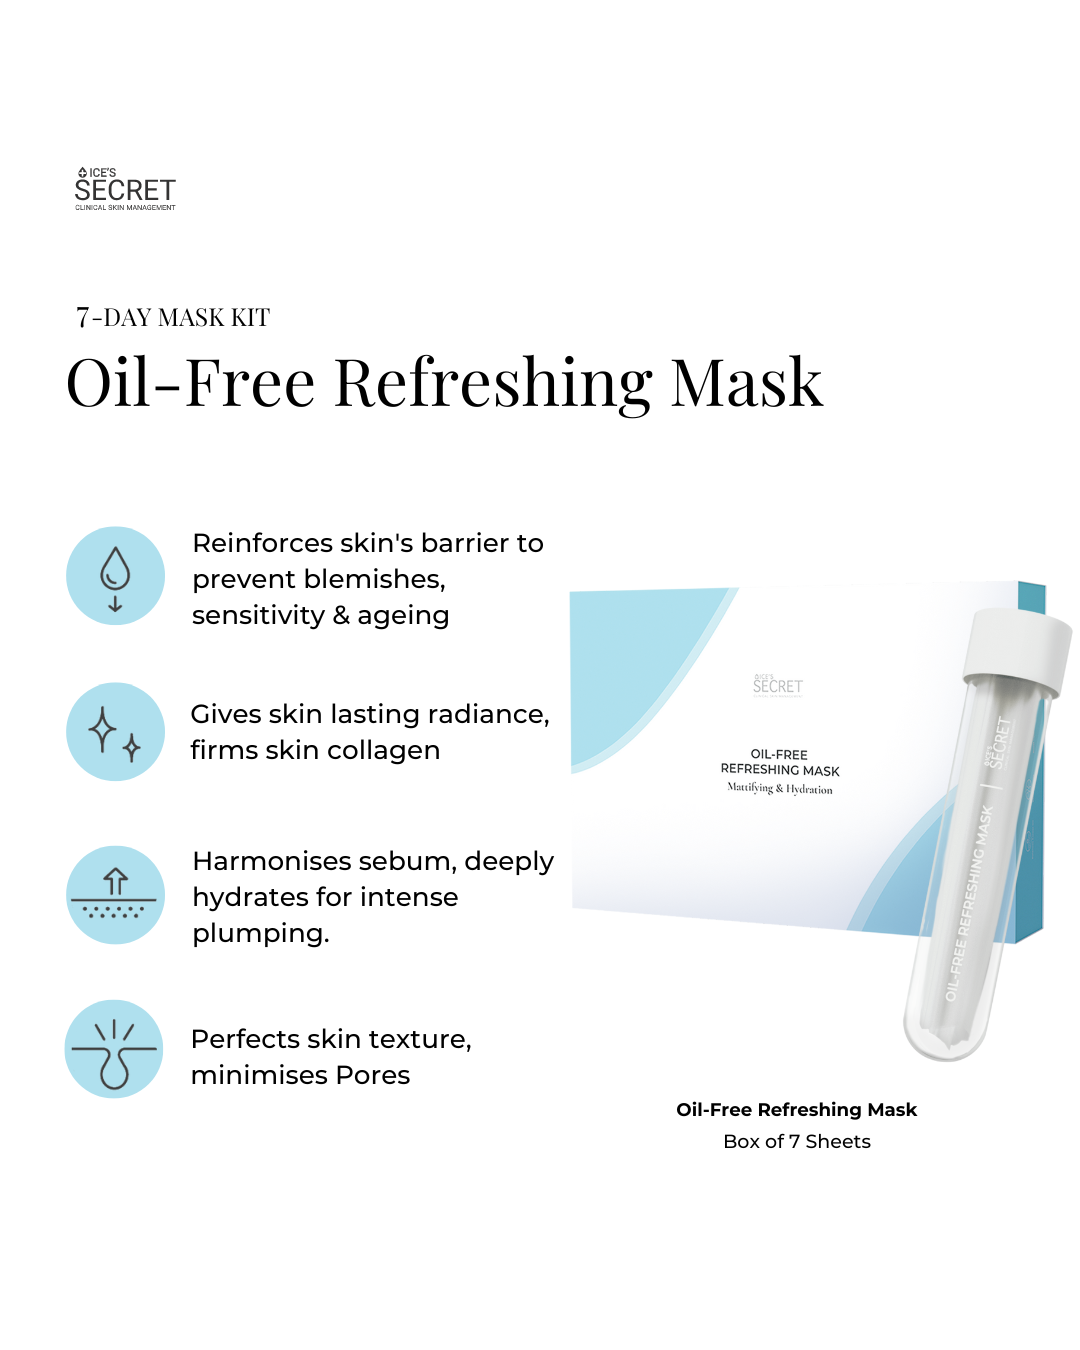 (Launch Special) Oil-Free Refreshing Mask Saver Bundle